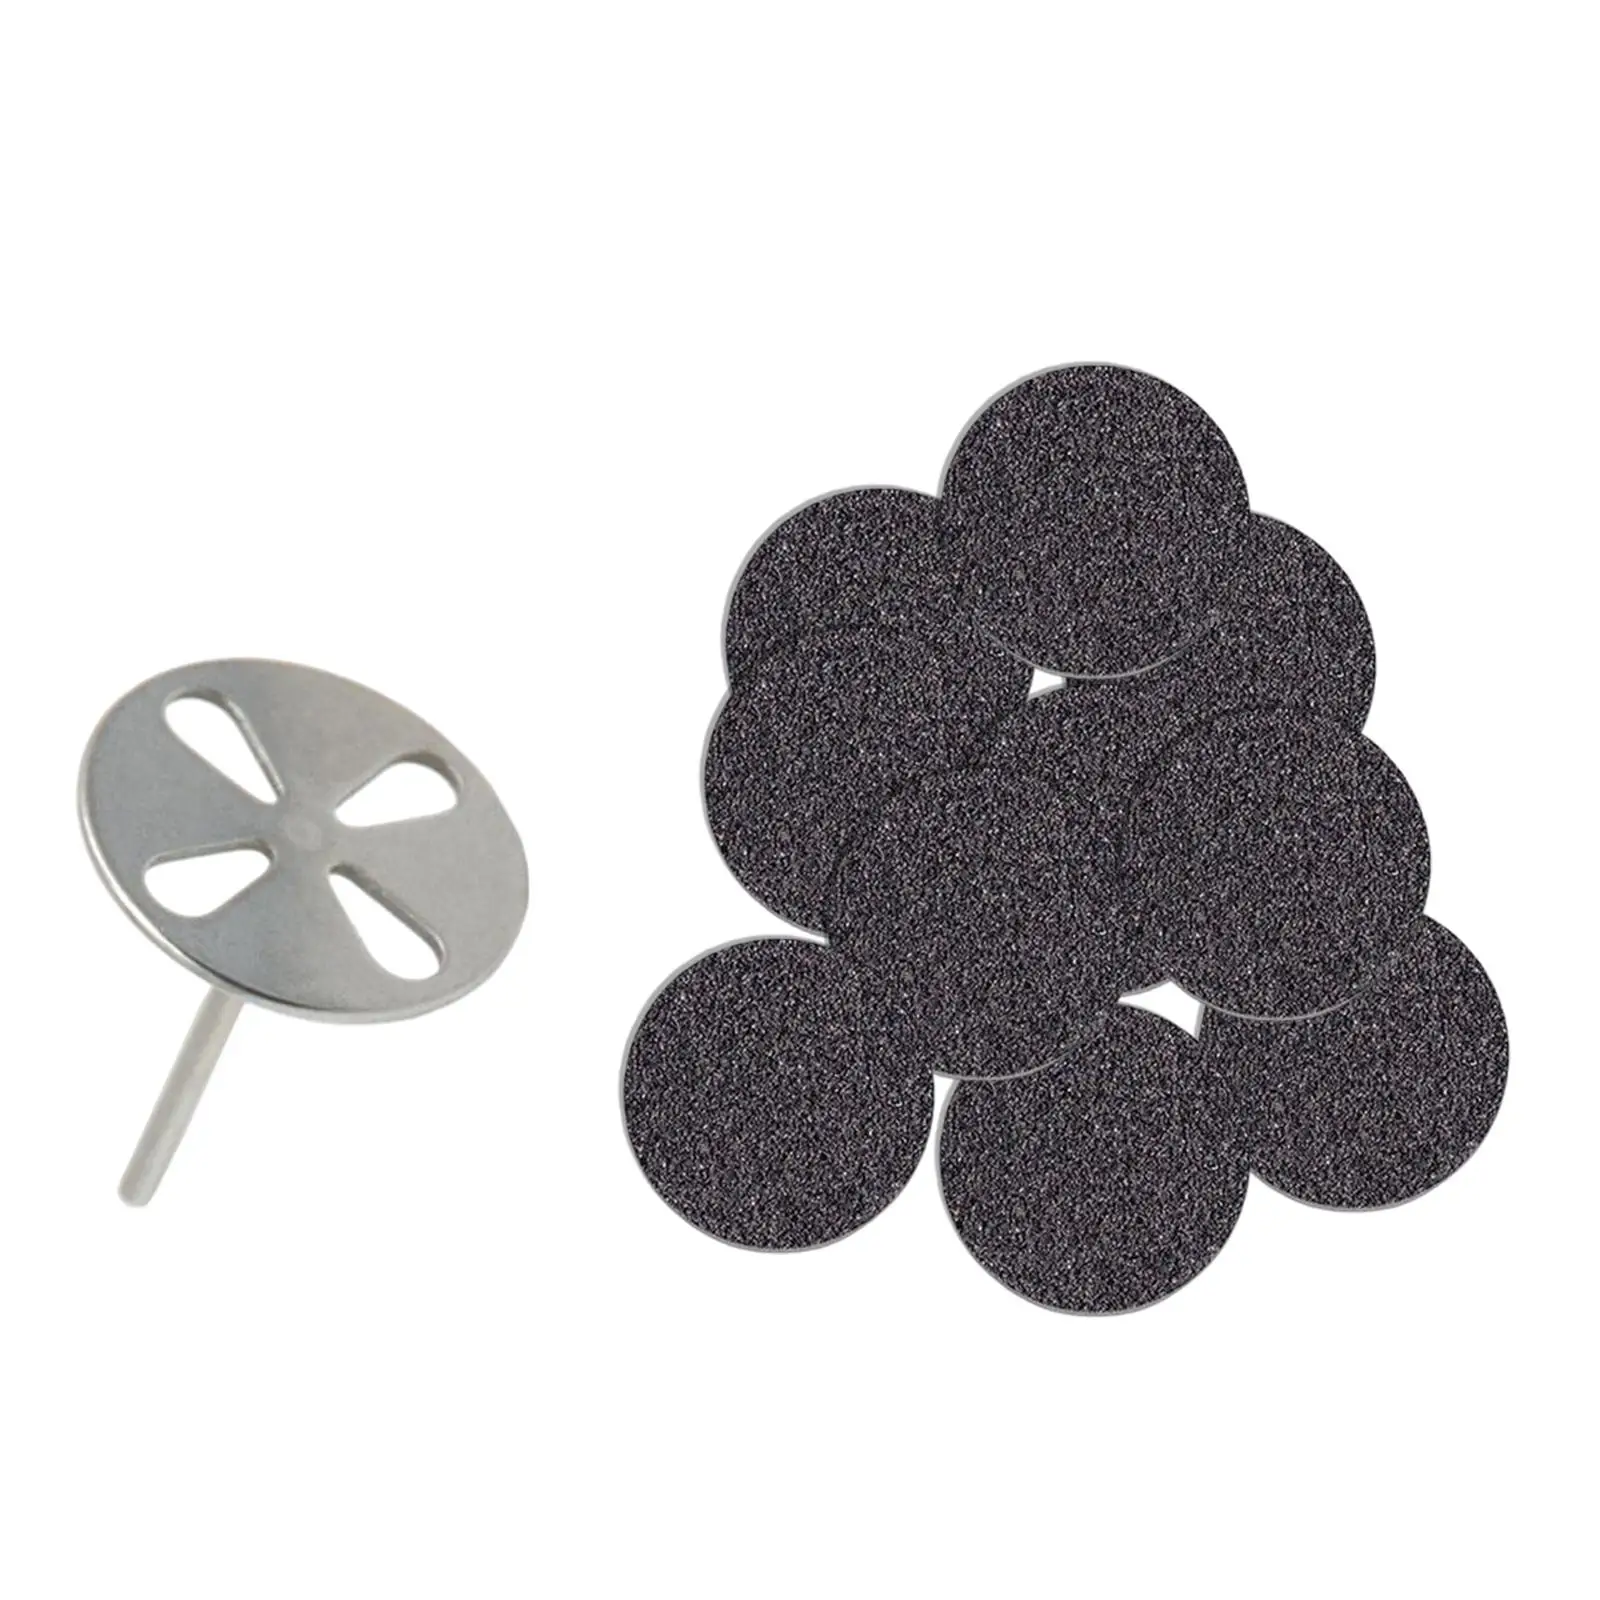 100 Pieces 25mm Sand Papers Sanding Disc Bit Sandpaper Replacement for Electric Foot File Hard Skin Dead Skin Foot Tool